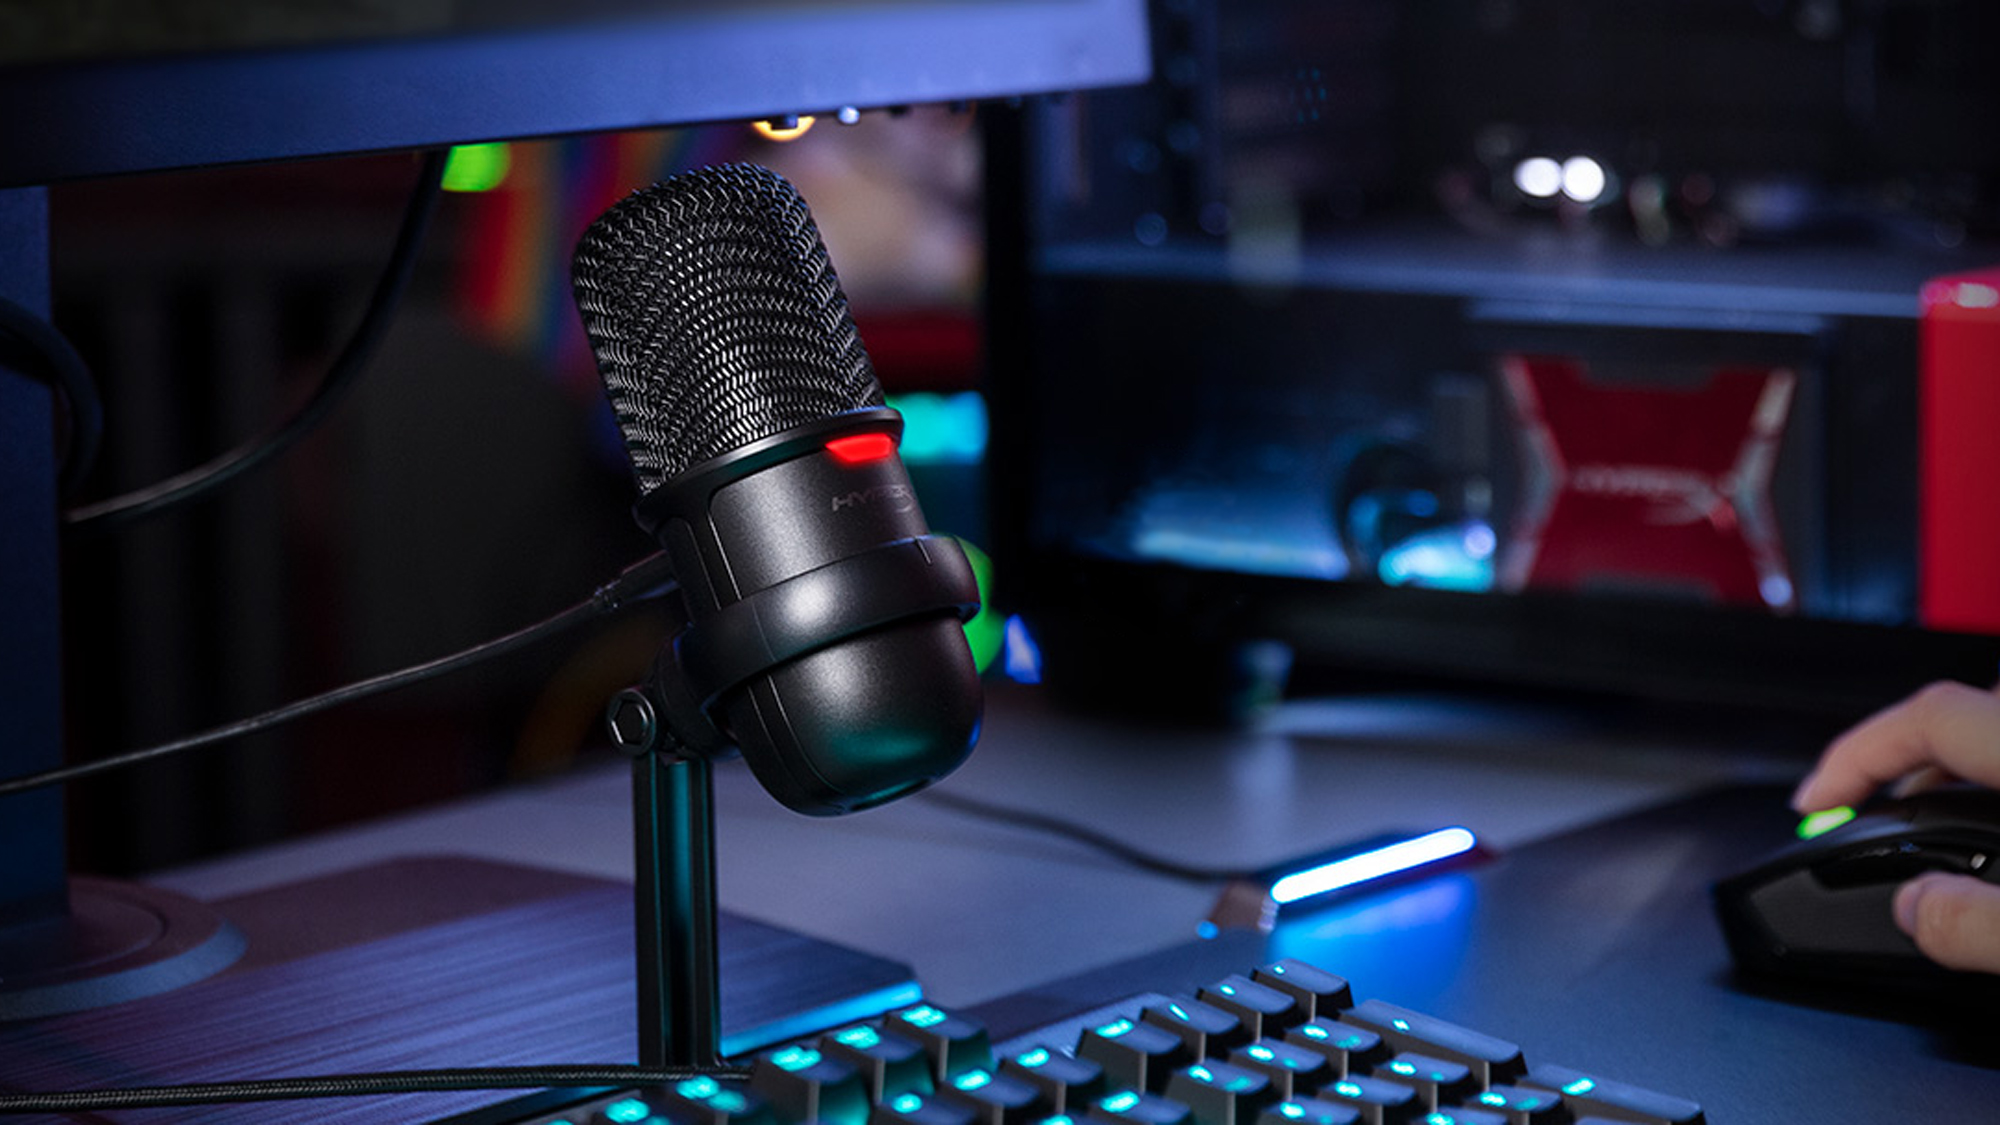 HyperX SoloCast Microphone review